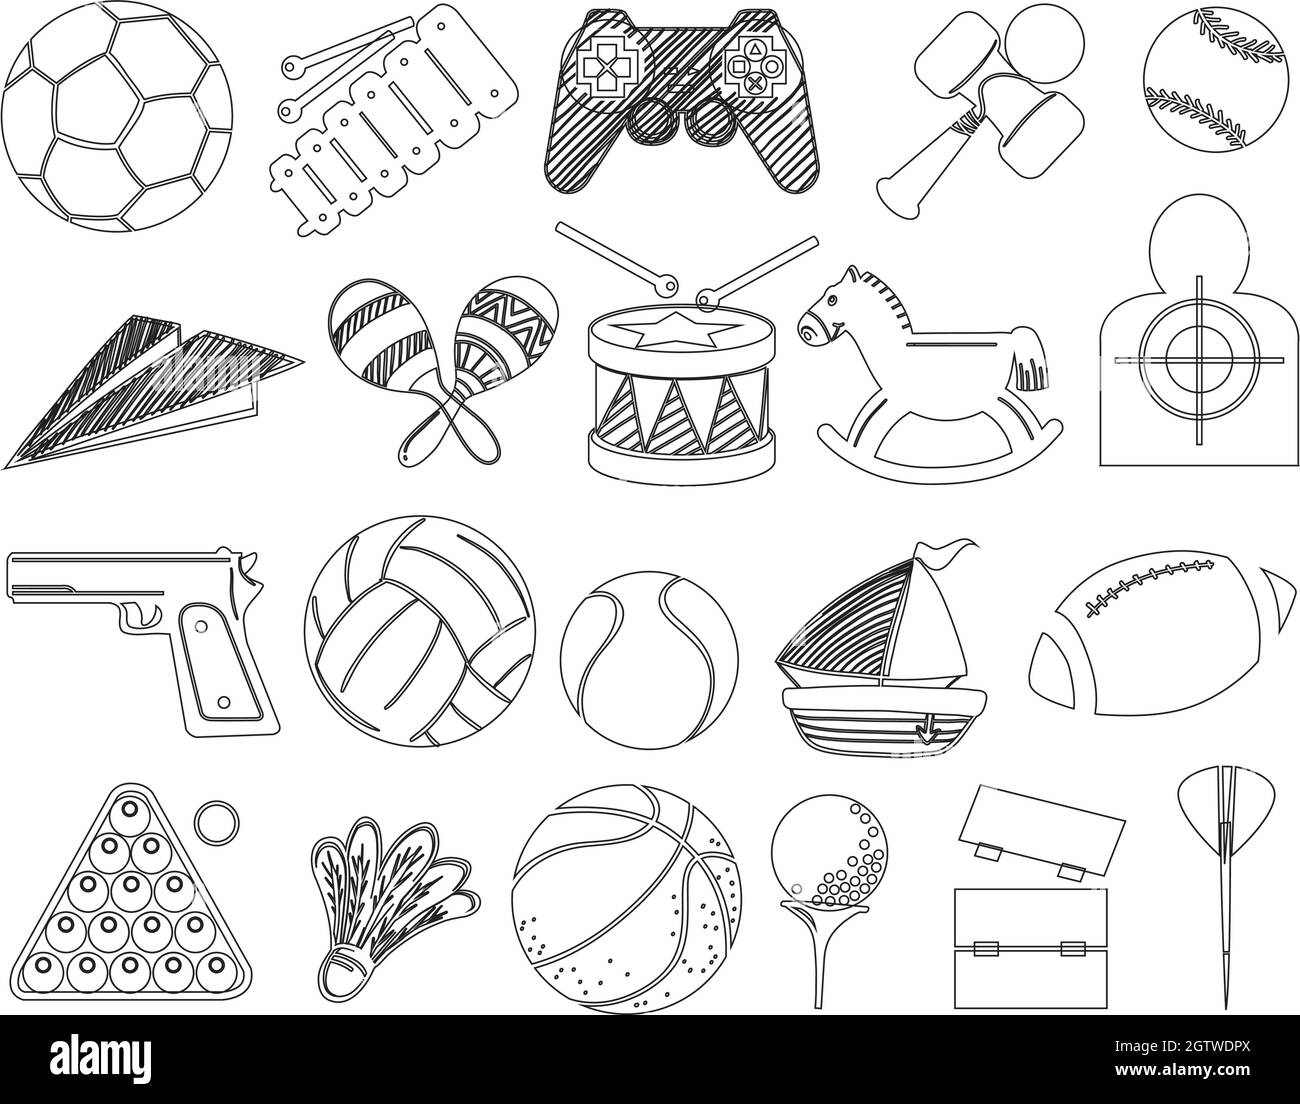 Doodle design of toys Stock Vector